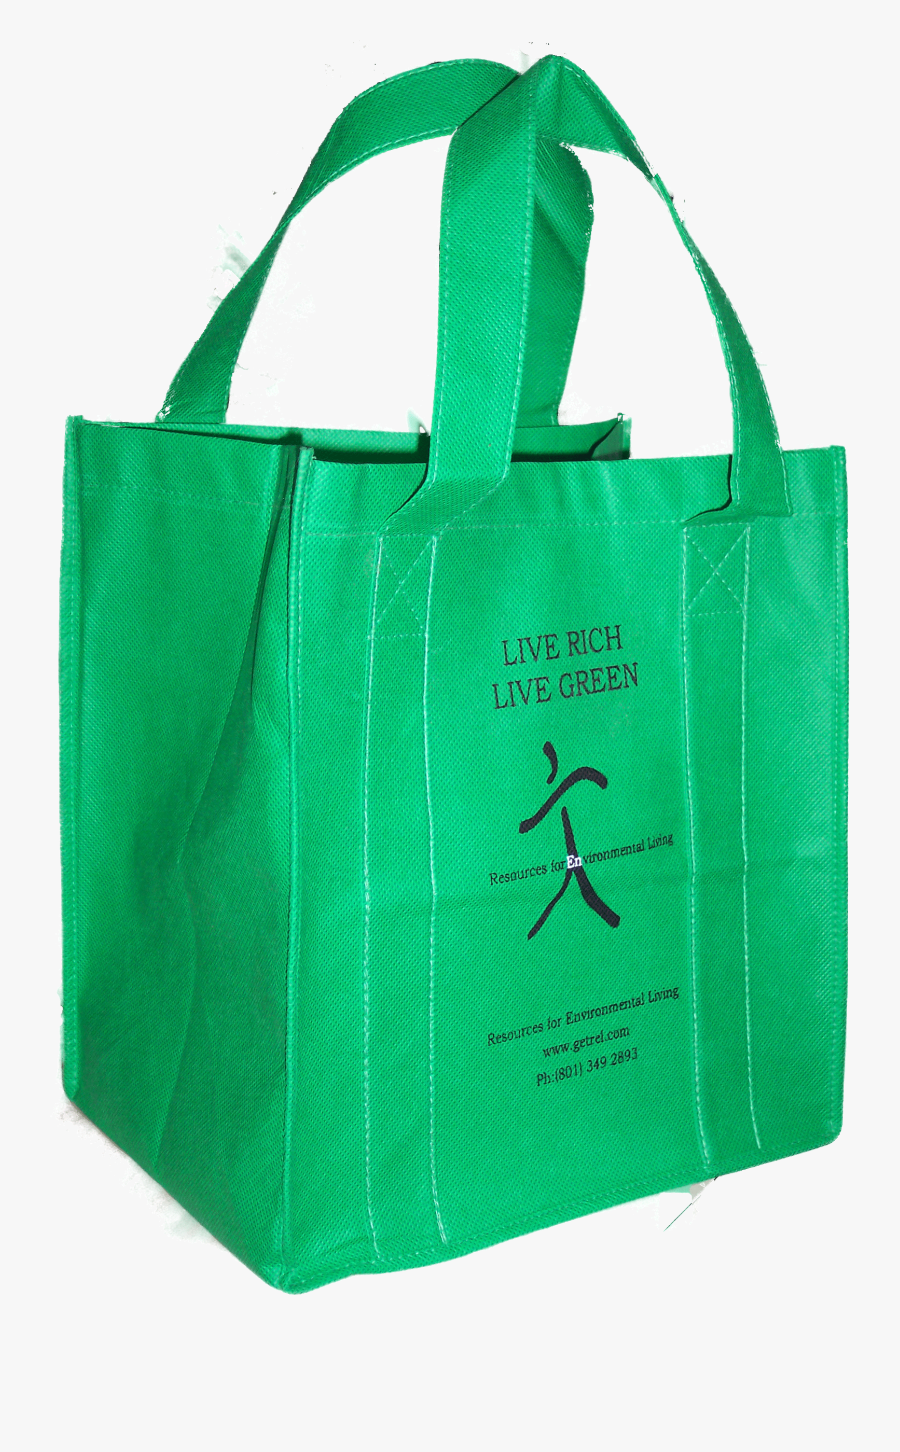 Food Safety Risk - Reusable Shopping Bags Transparent, Transparent Clipart